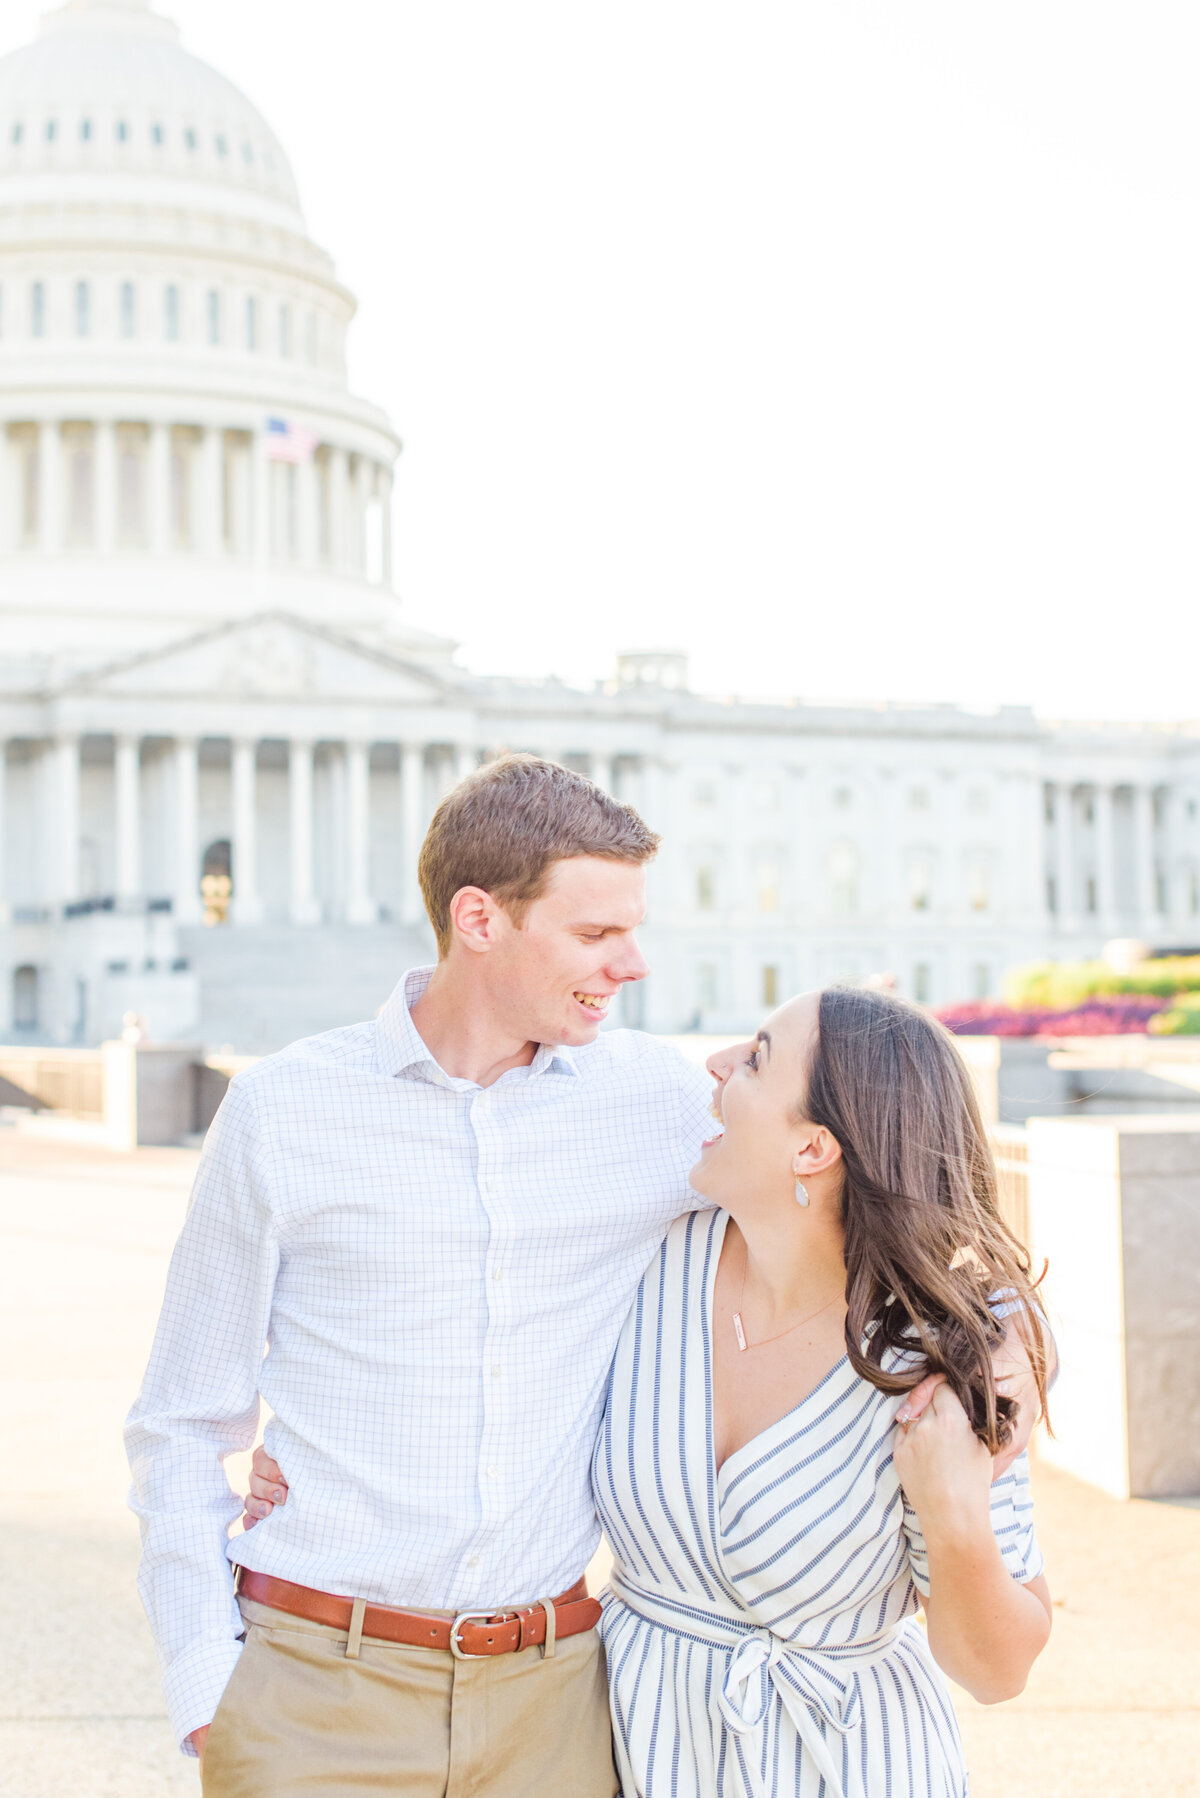 US Capitol Hill Engagement Session Photographer in Washington, DC